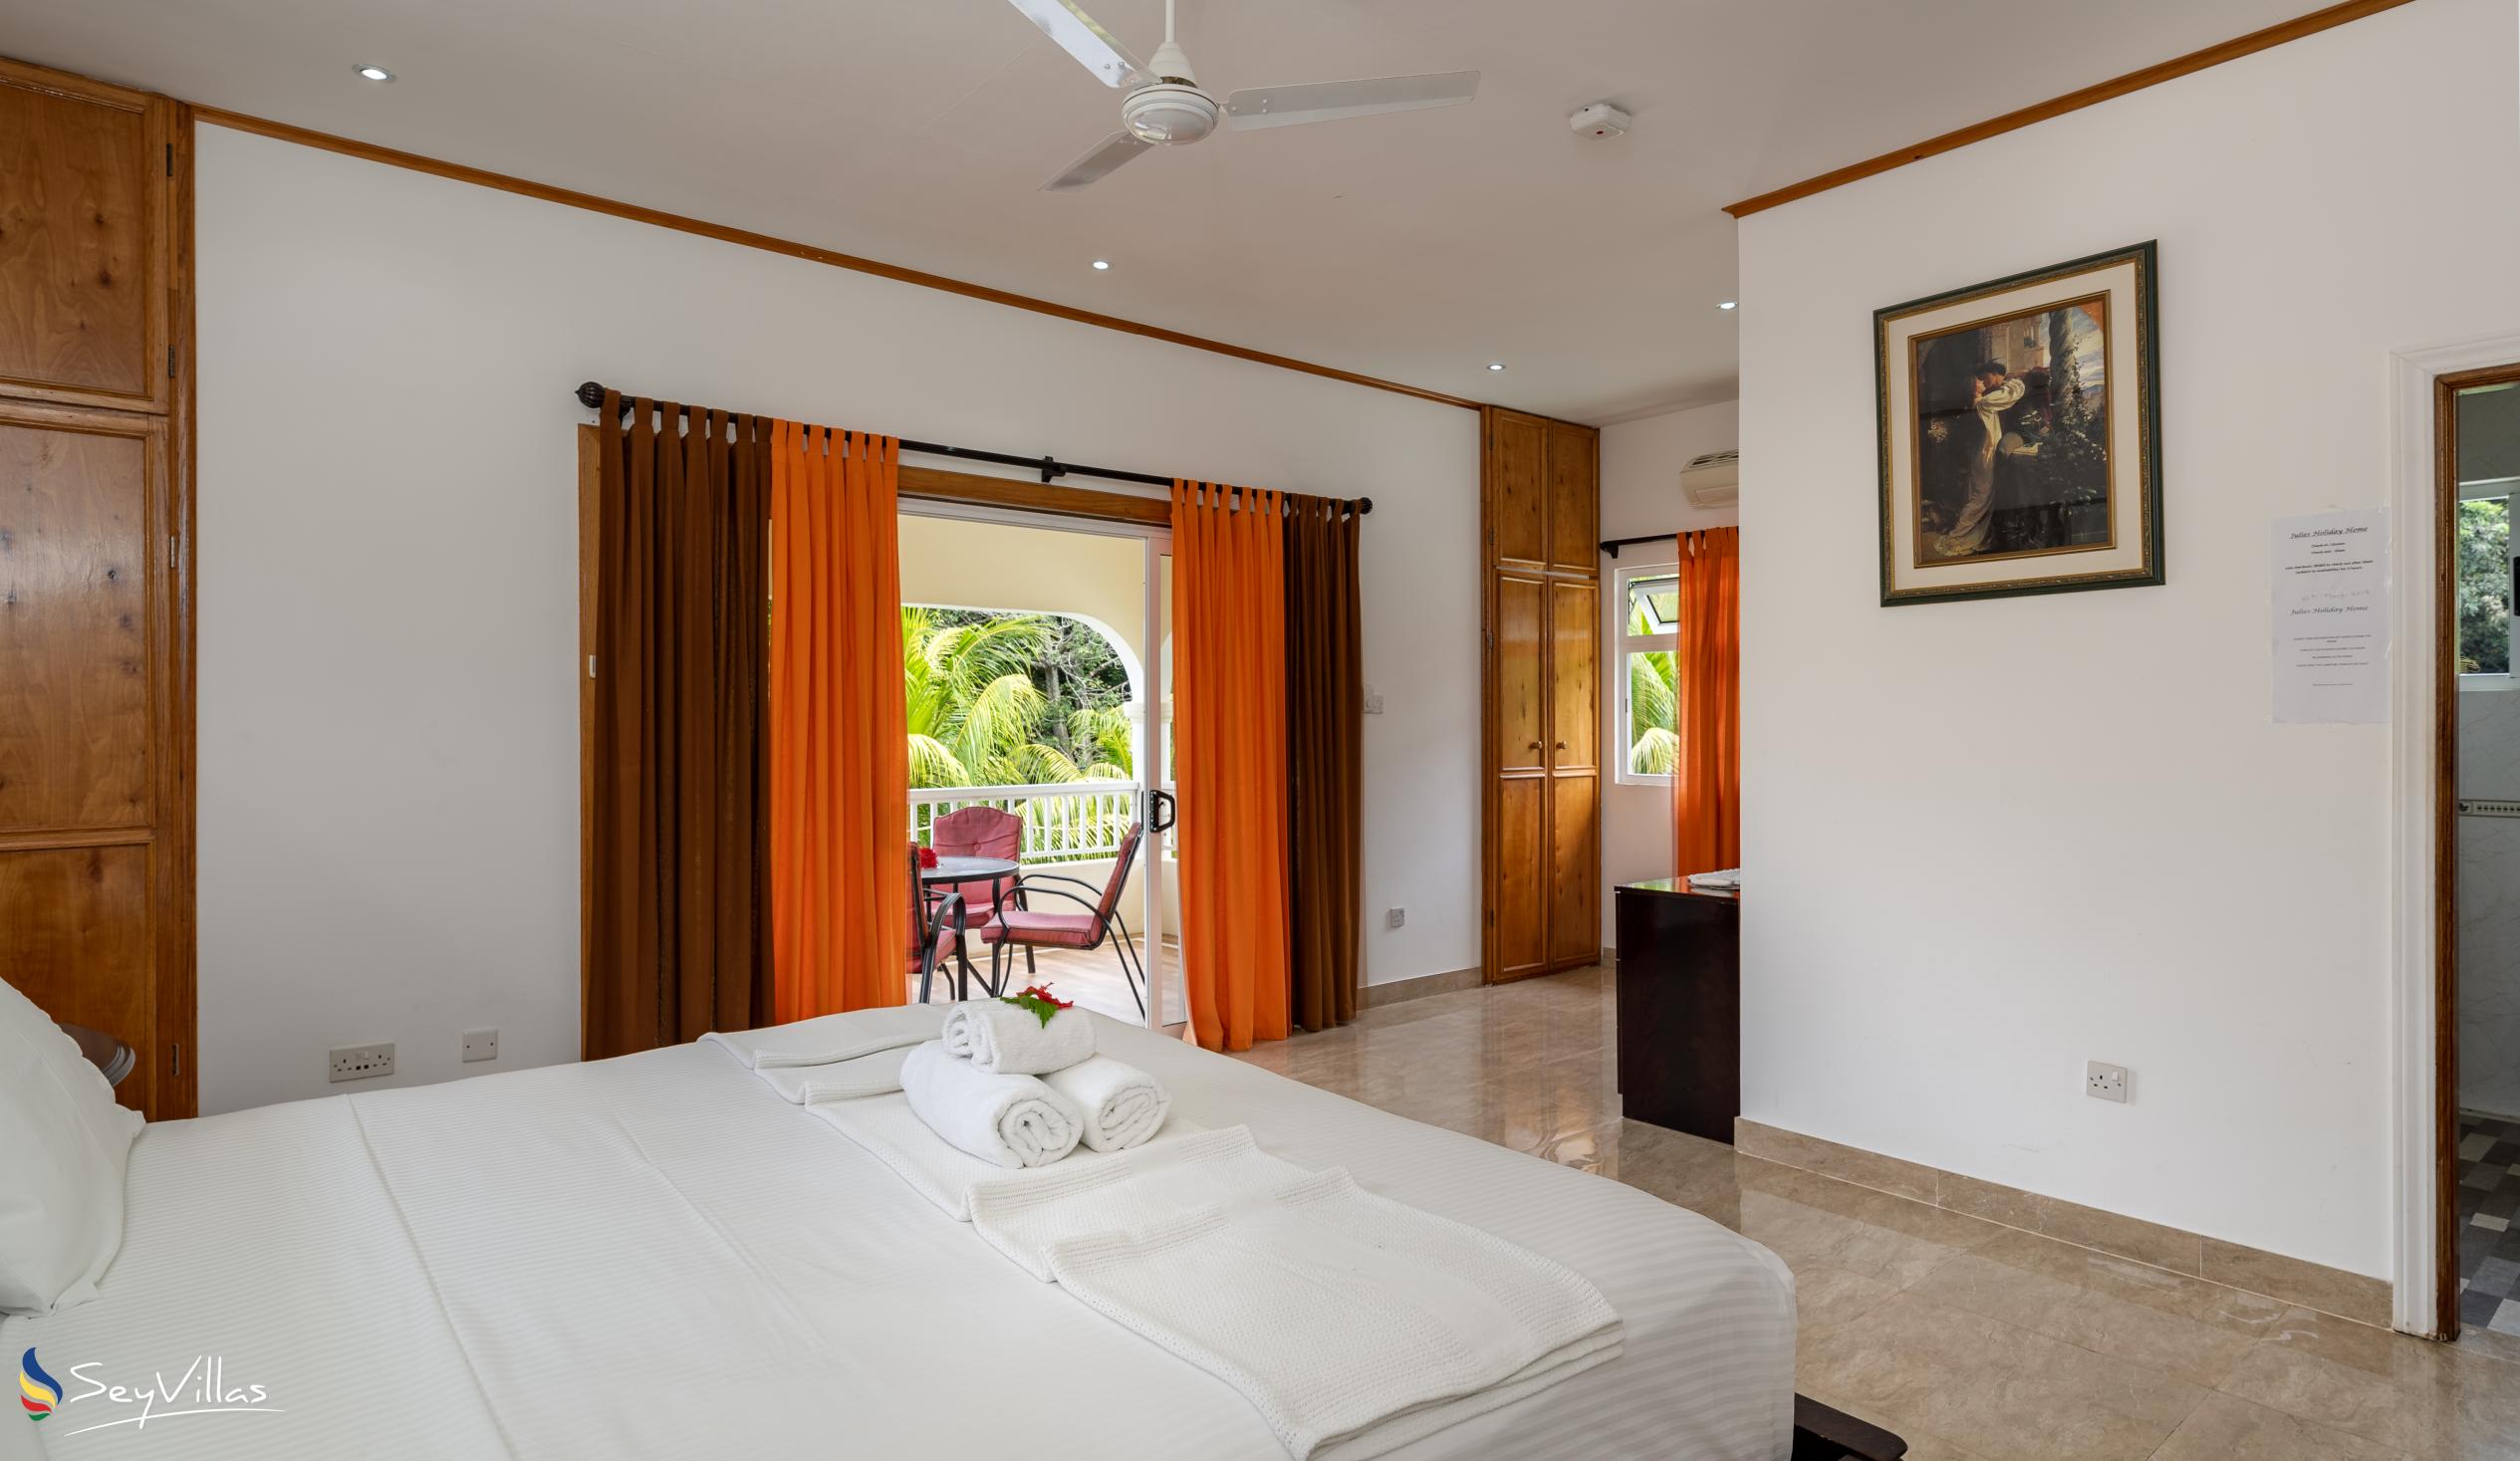 Photo 51: Julie's Holiday Home - Double Room with Garden View - Mahé (Seychelles)